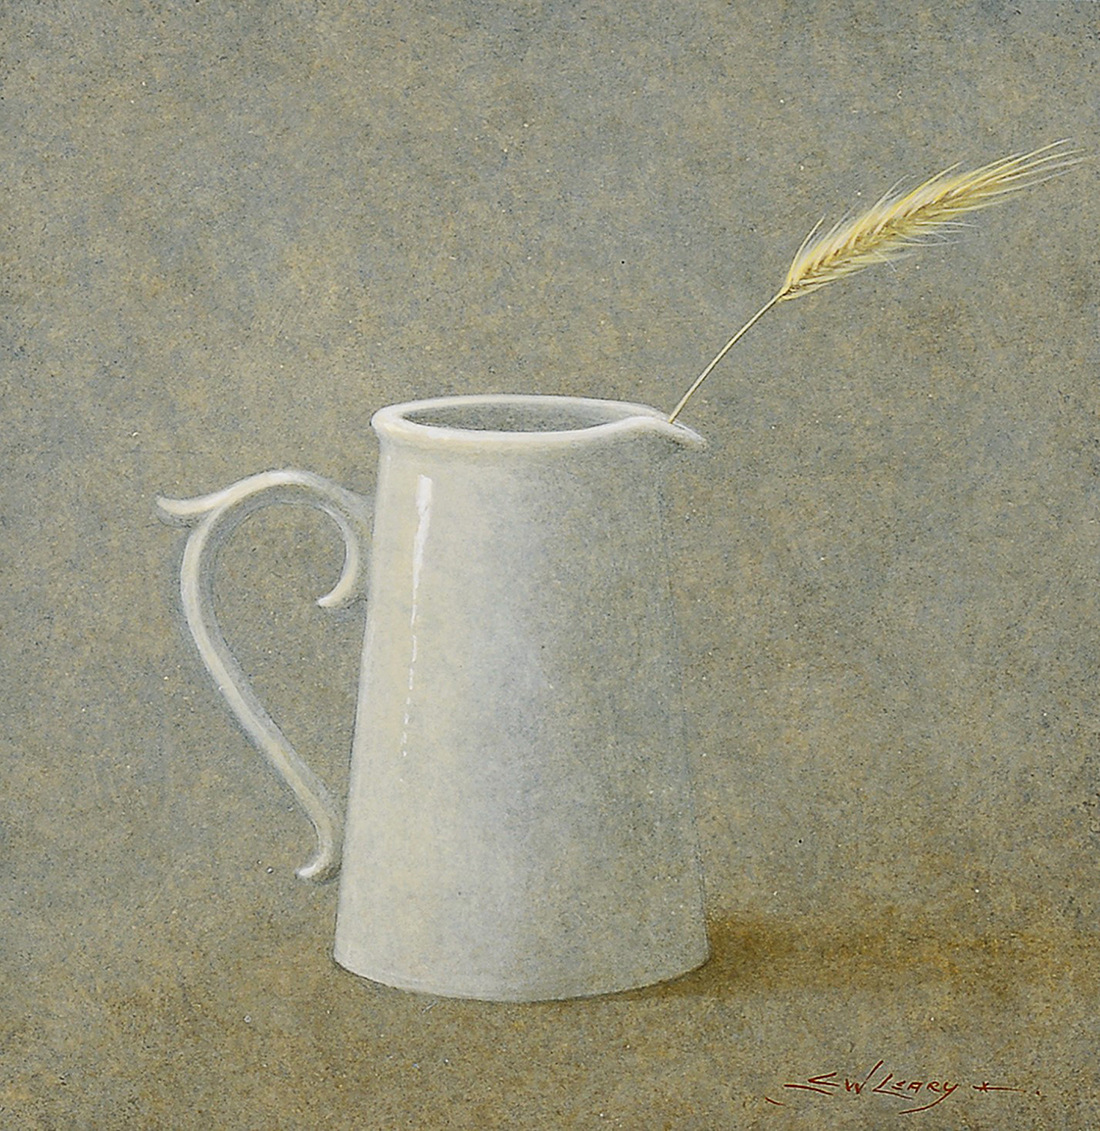 
		                					Elizabeth Wadleigh Leary		                																	
																											<i>White Pitcher,</i>  
																																								2009, 
																																								acrylic on panel, 
																																								9 ½ x 9 ½ inches 
																								
		                				